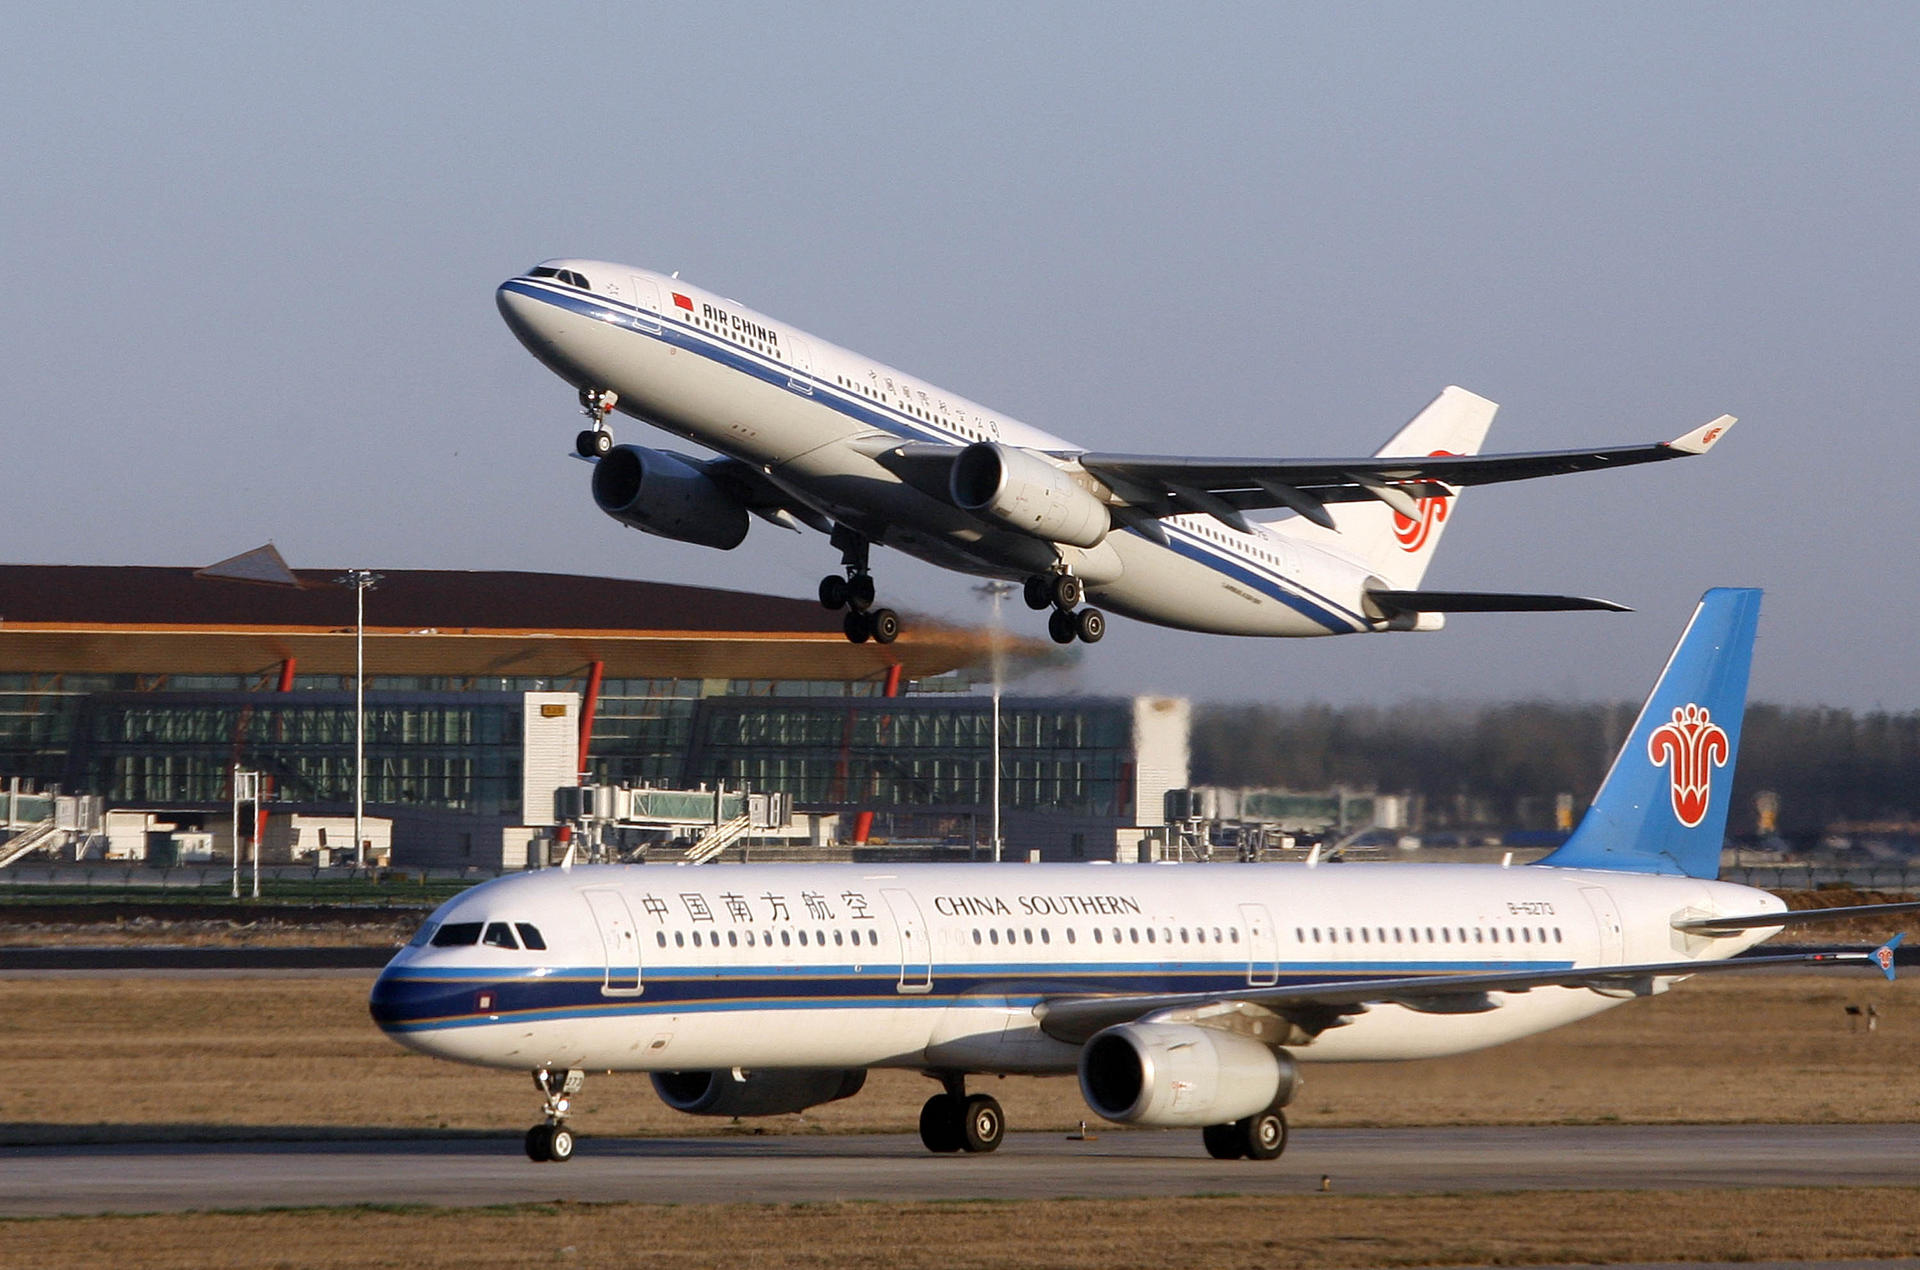 Guangzhou-based China Southern could report a 36 per cent slump in net profit to 2.35 billion yuan on Friday. Photo: Bloomberg